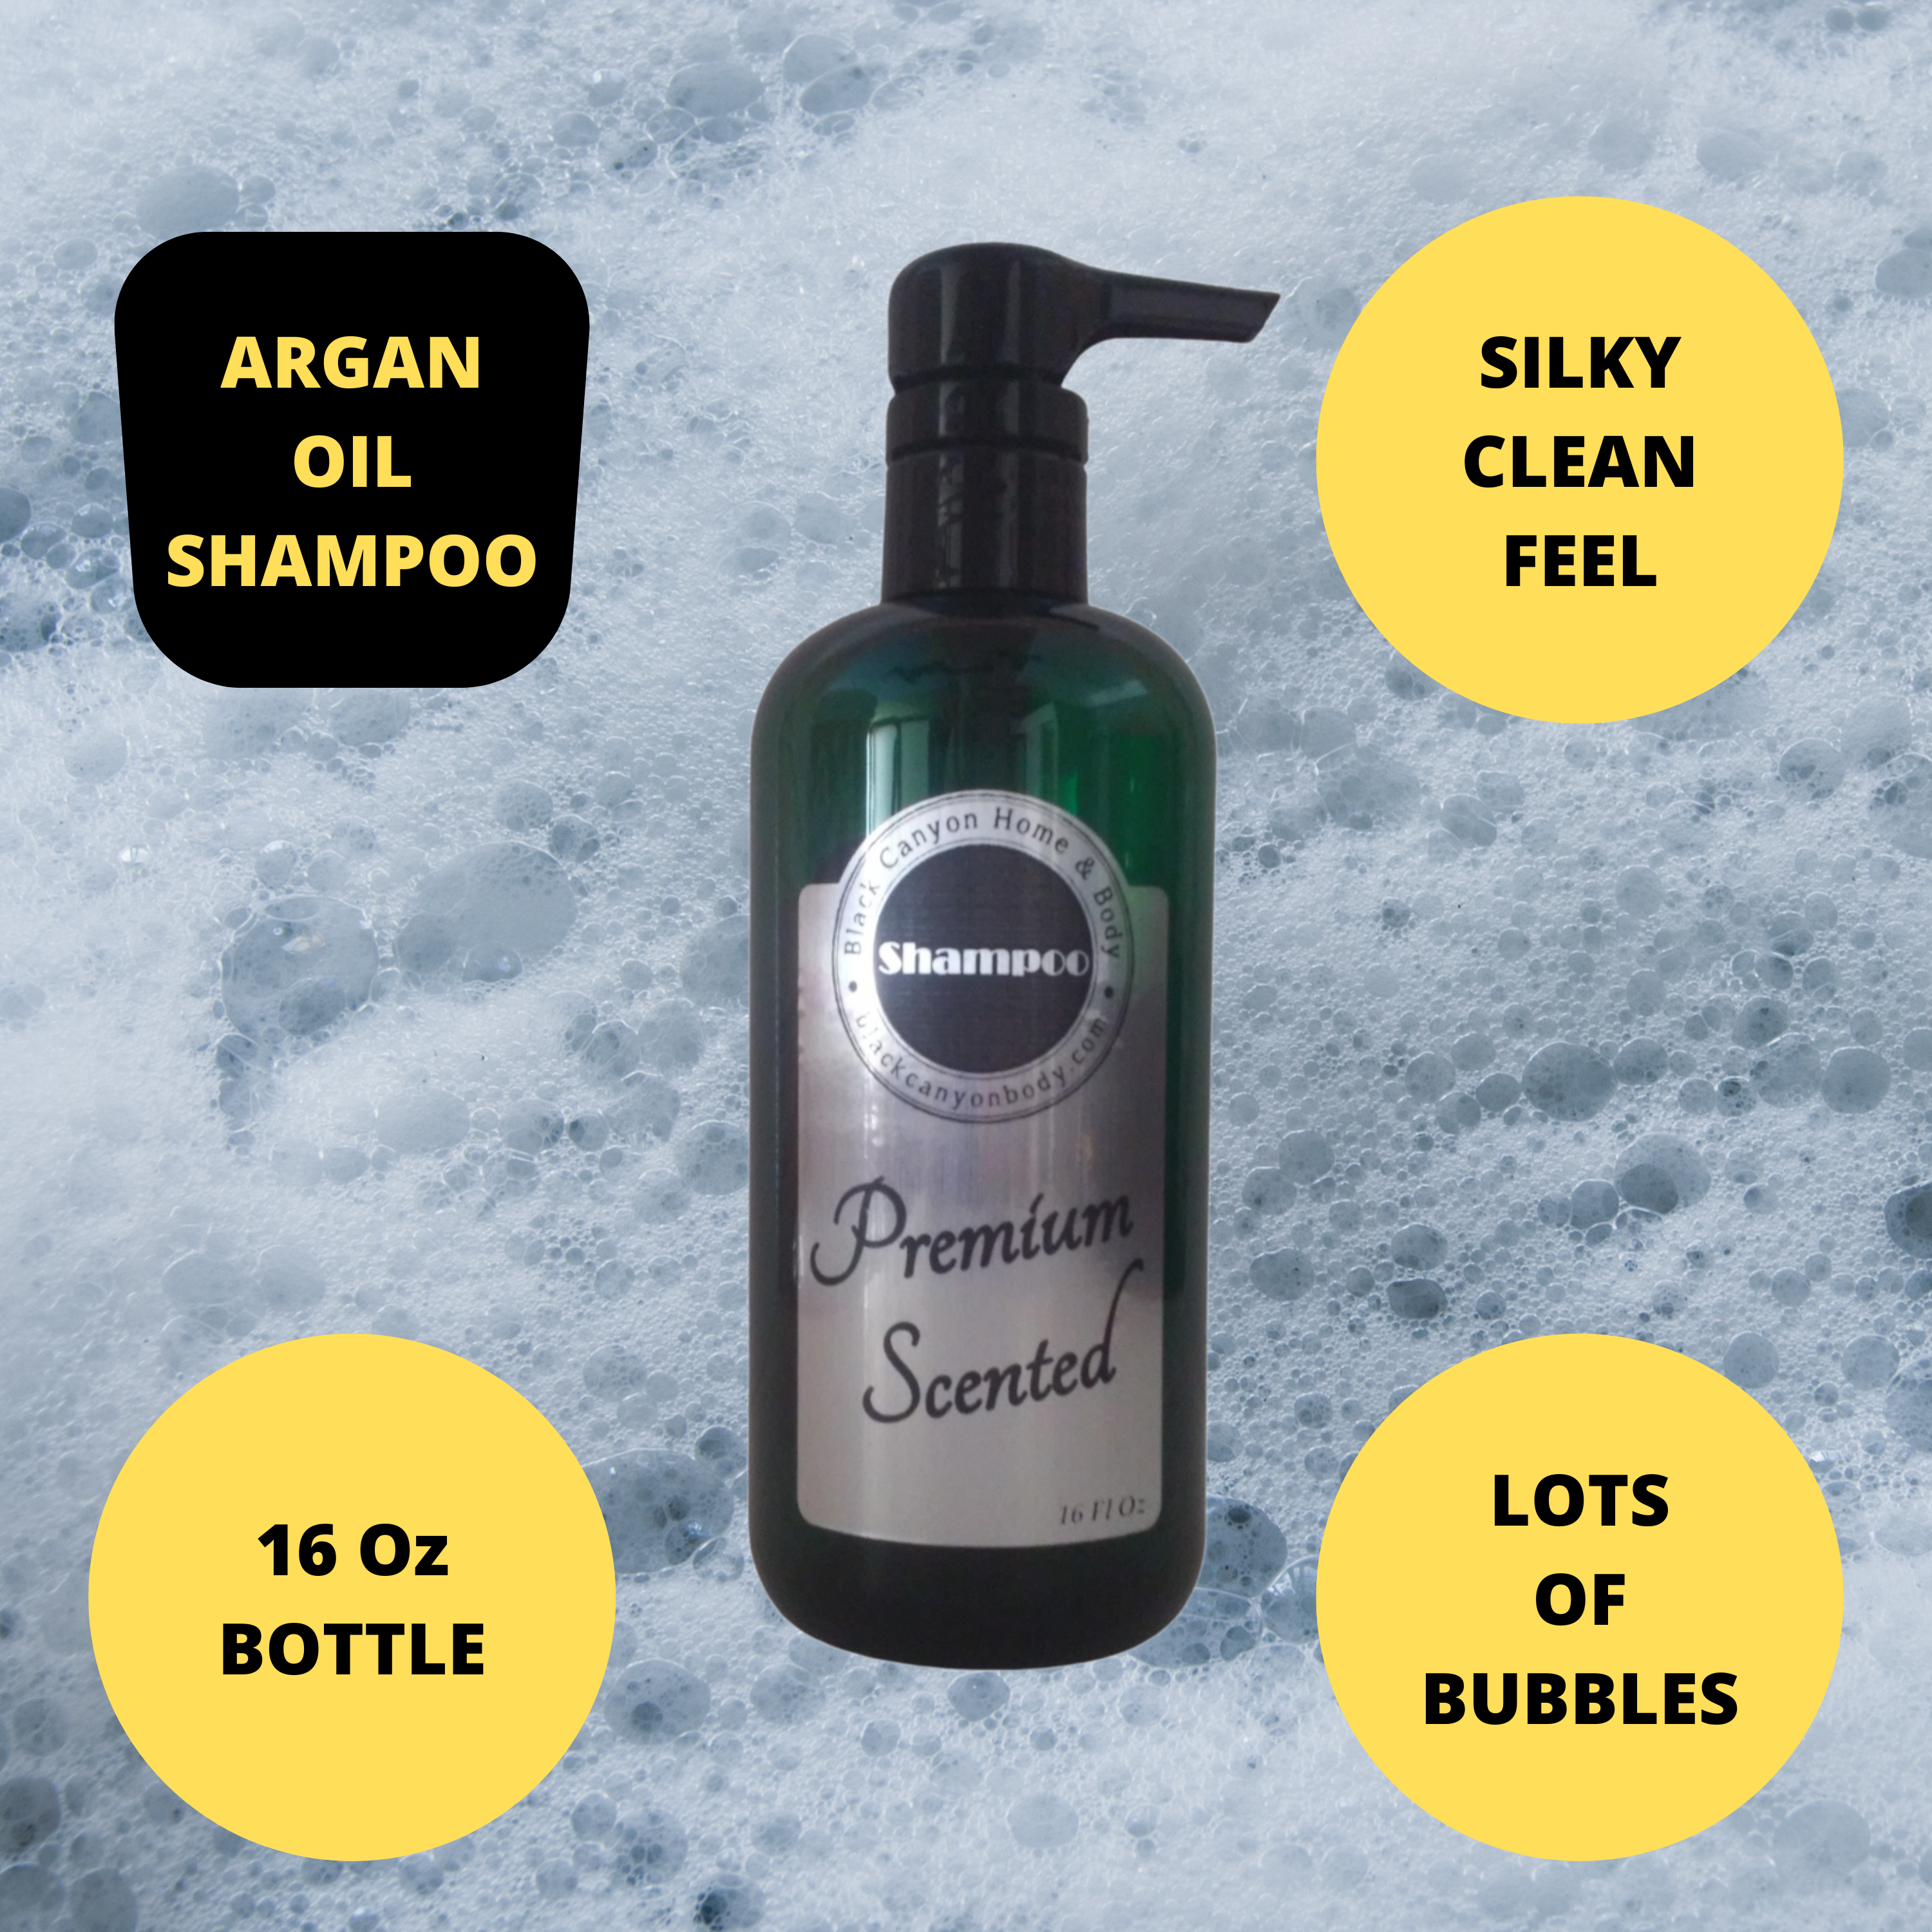 Black Canyon Simply Smitten Scented Shampoo with Argan Oil